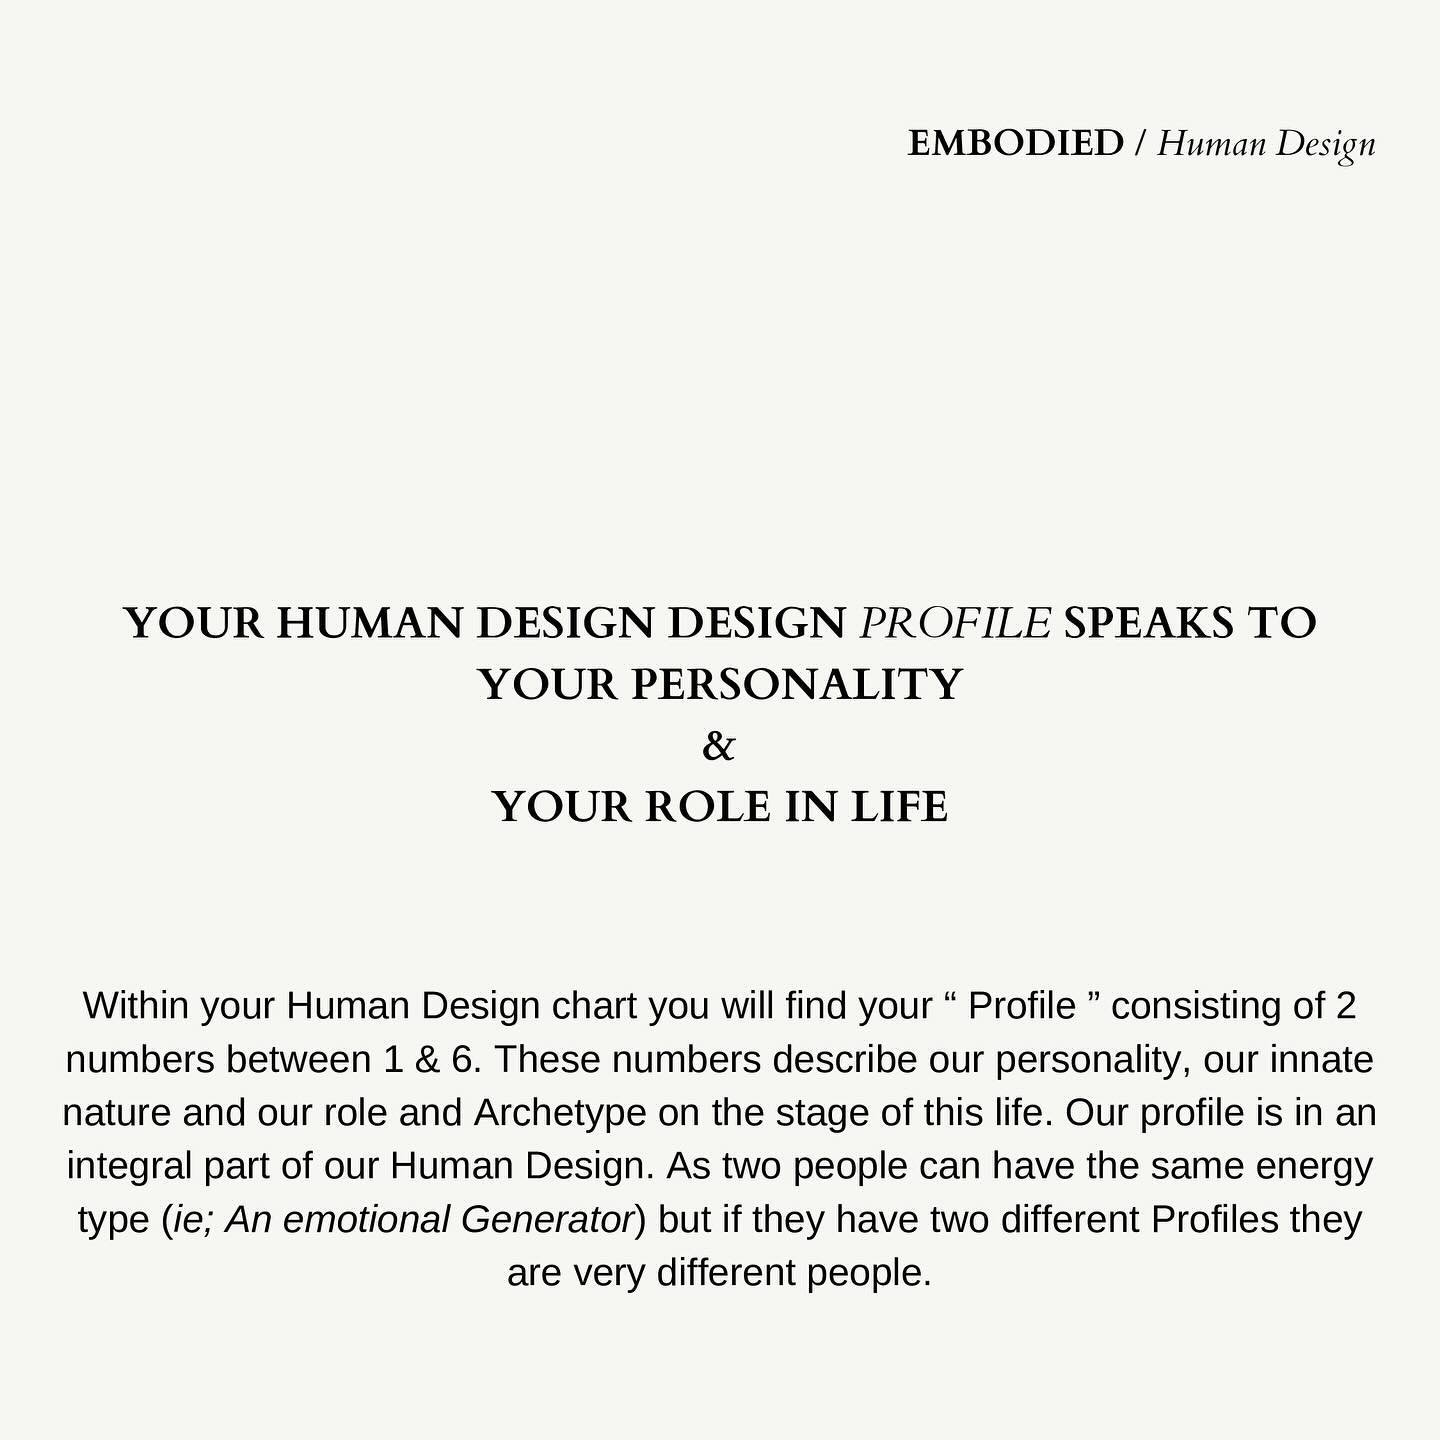 Your Profile is an important part of understanding your Human Design.